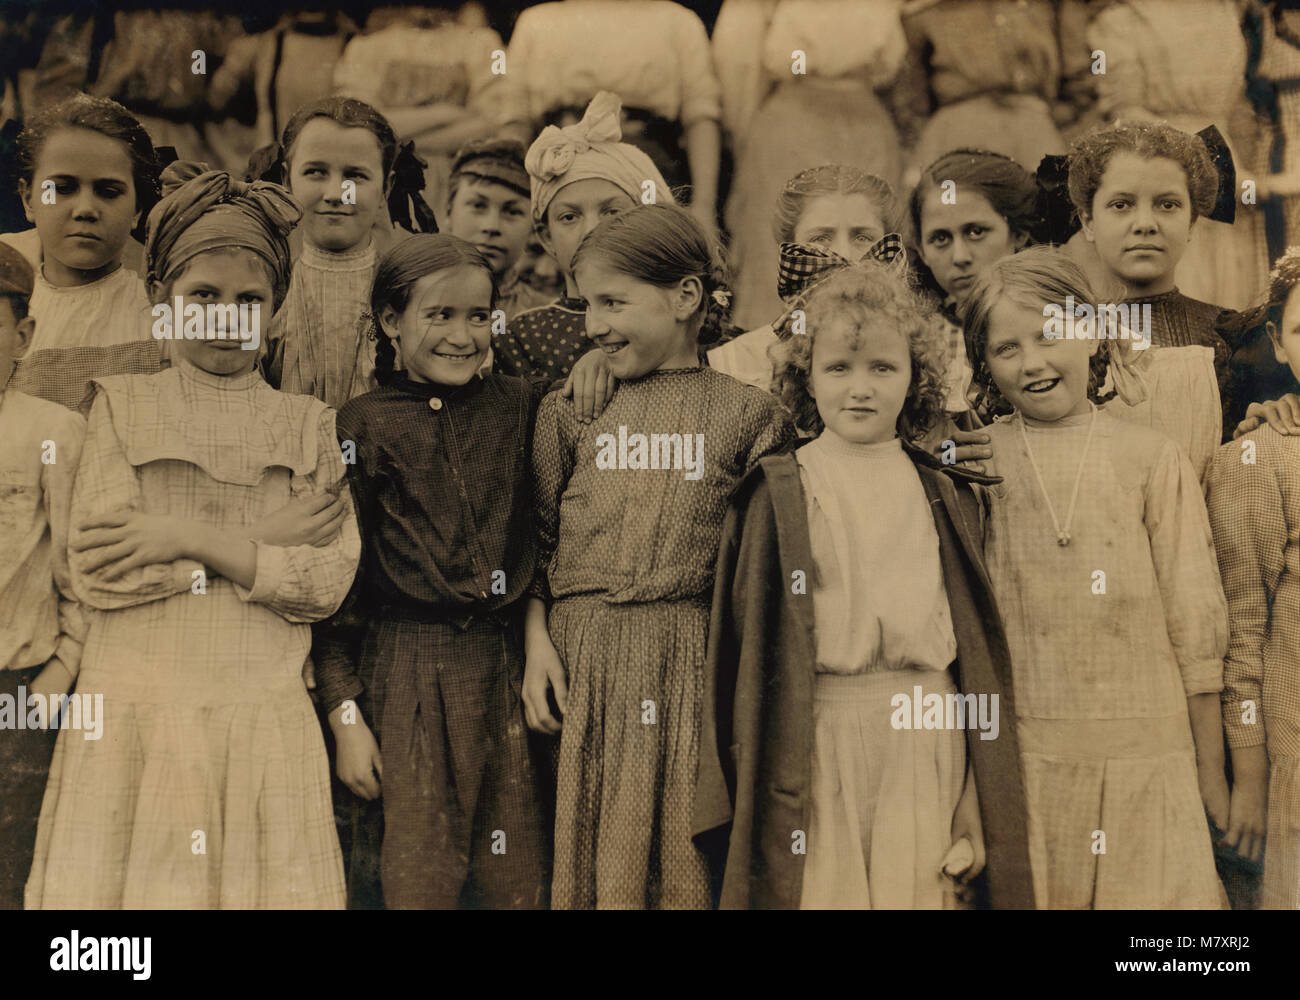 Group of Very Young Girls, Cleveland Hosiery Mills, Cleveland, Tennessee, USA, Lewis Hine for National Child Labor Committee, December 1910 Stock Photo